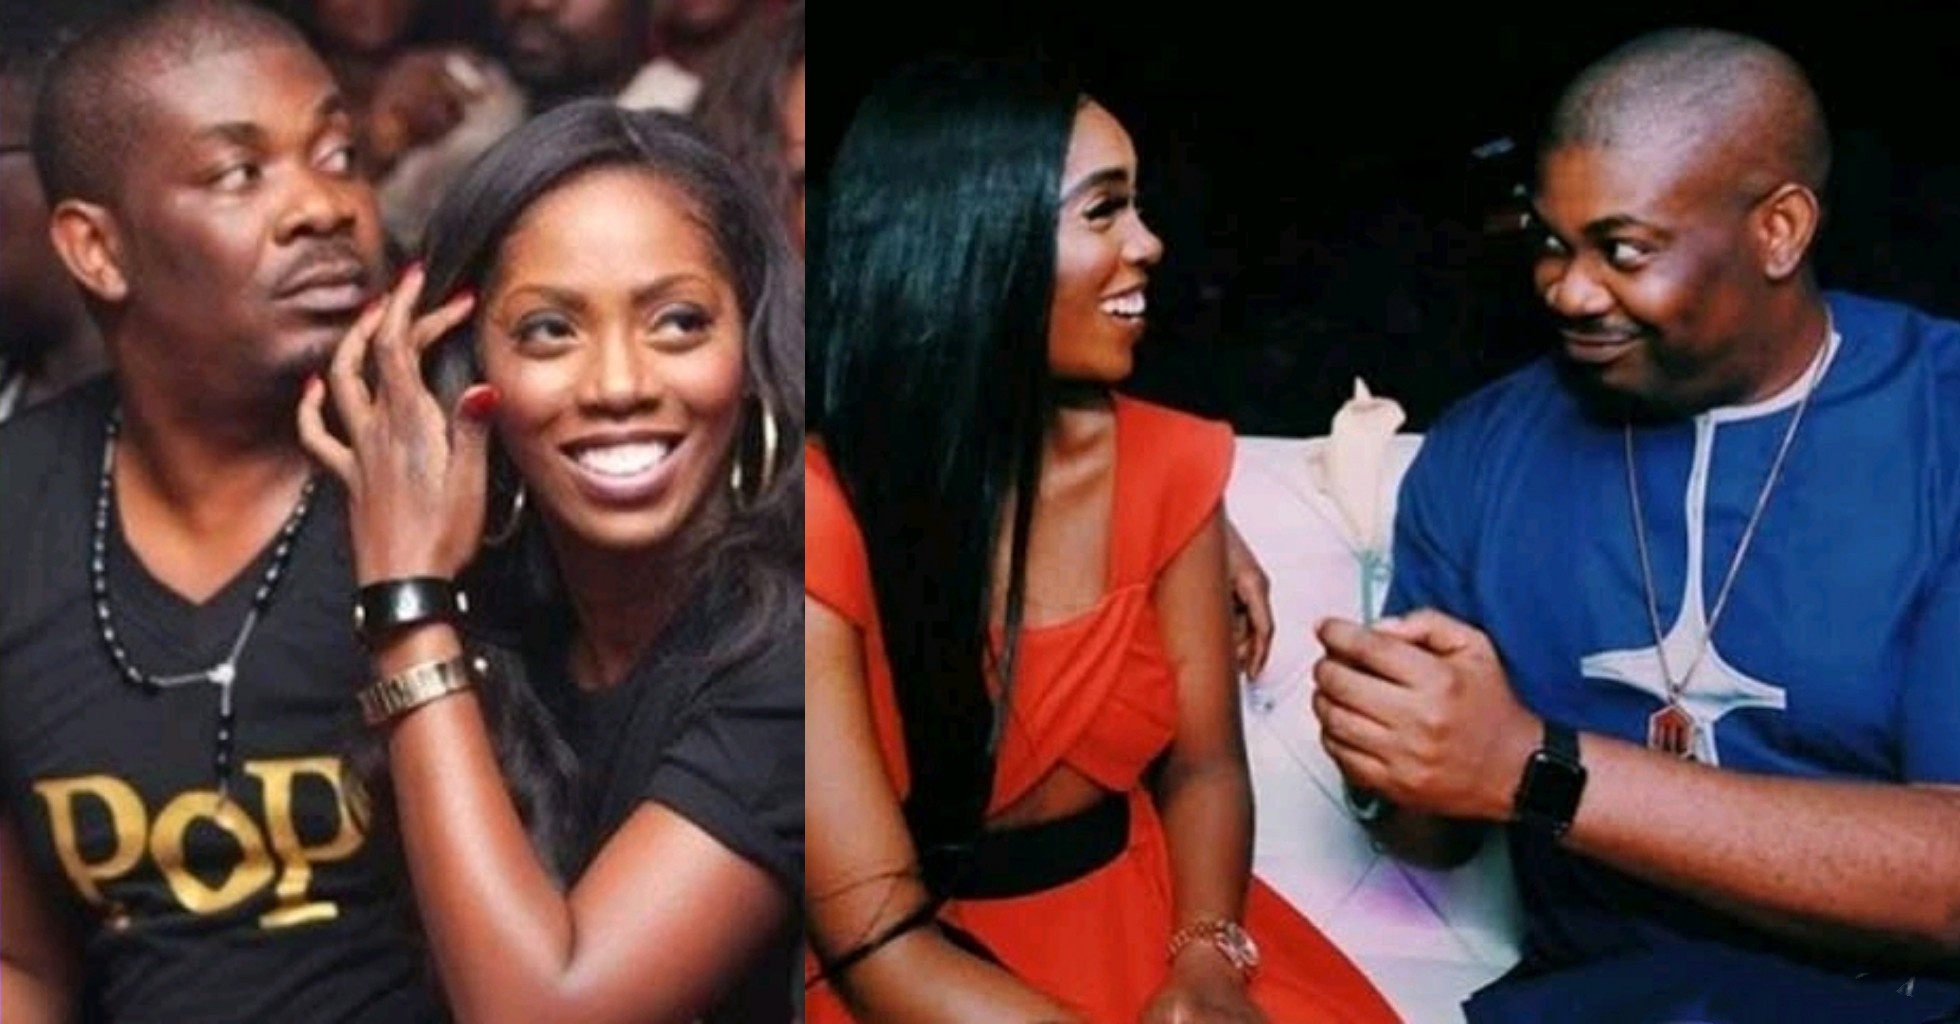 “I’m pregnant for Don Jazzy” – Tiwa Savage jokingly admits, He reacts.